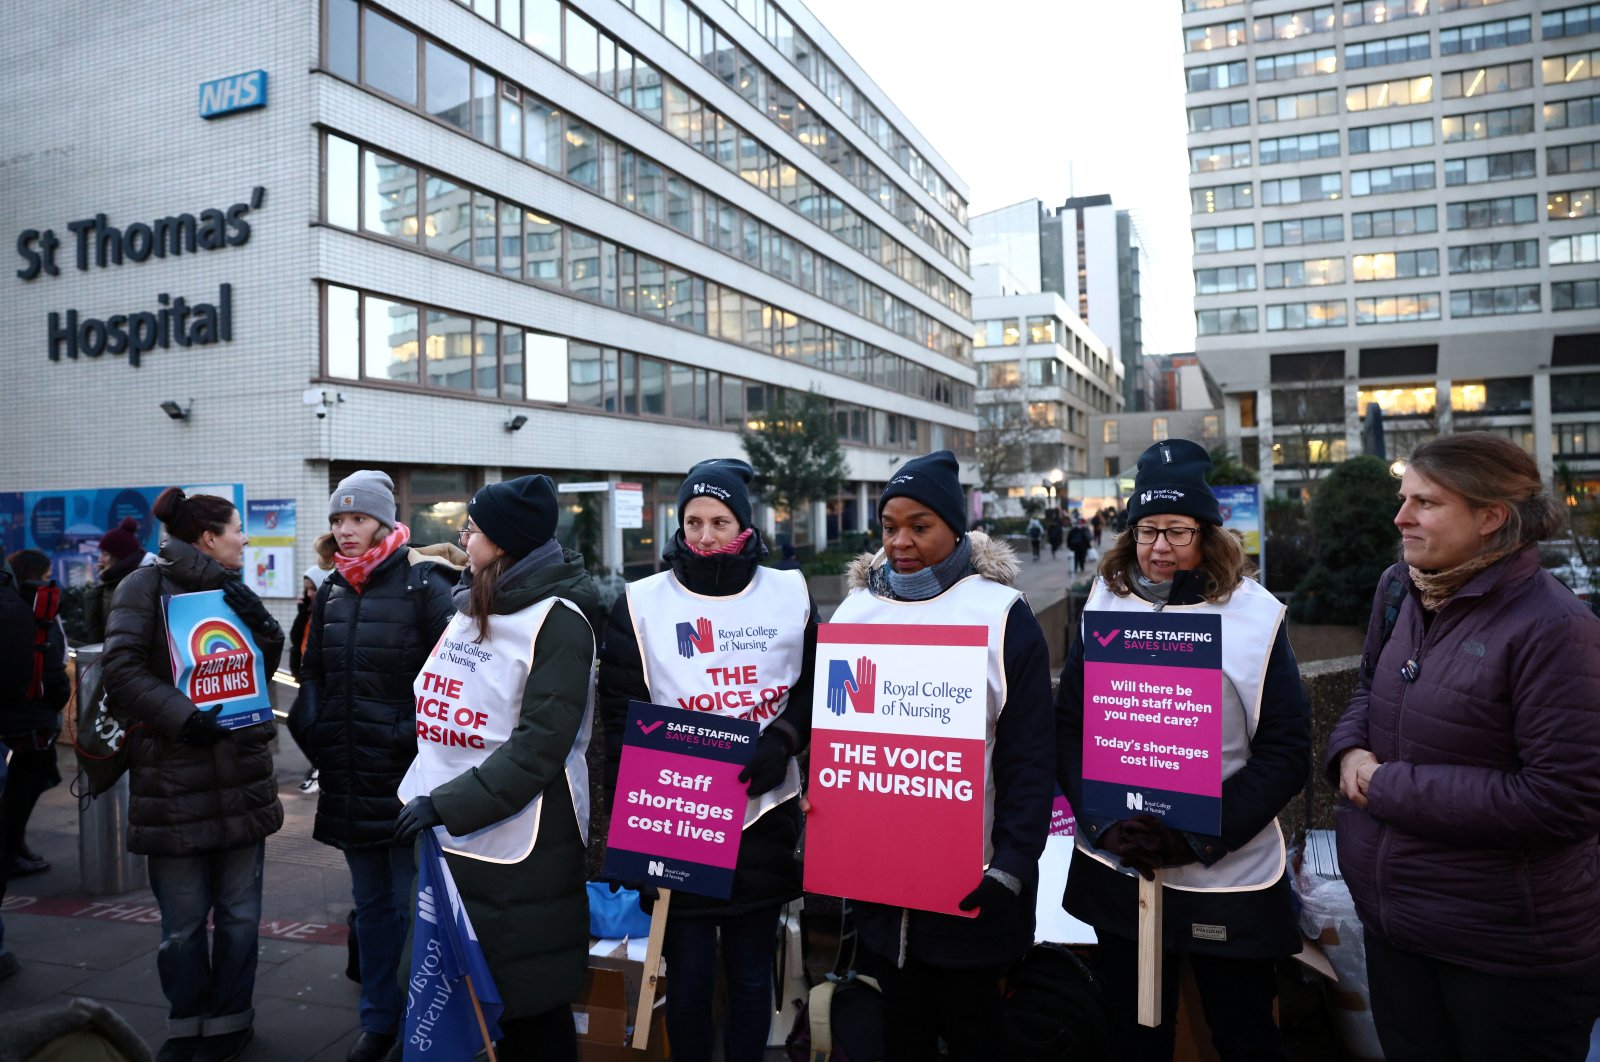 NHS nurses display signs at a strike, due to a dispute with the government over pay, outside St. Thomas&#039; Hospital in London, U.K., Dec. 15, 2022. (Reuters Photo)